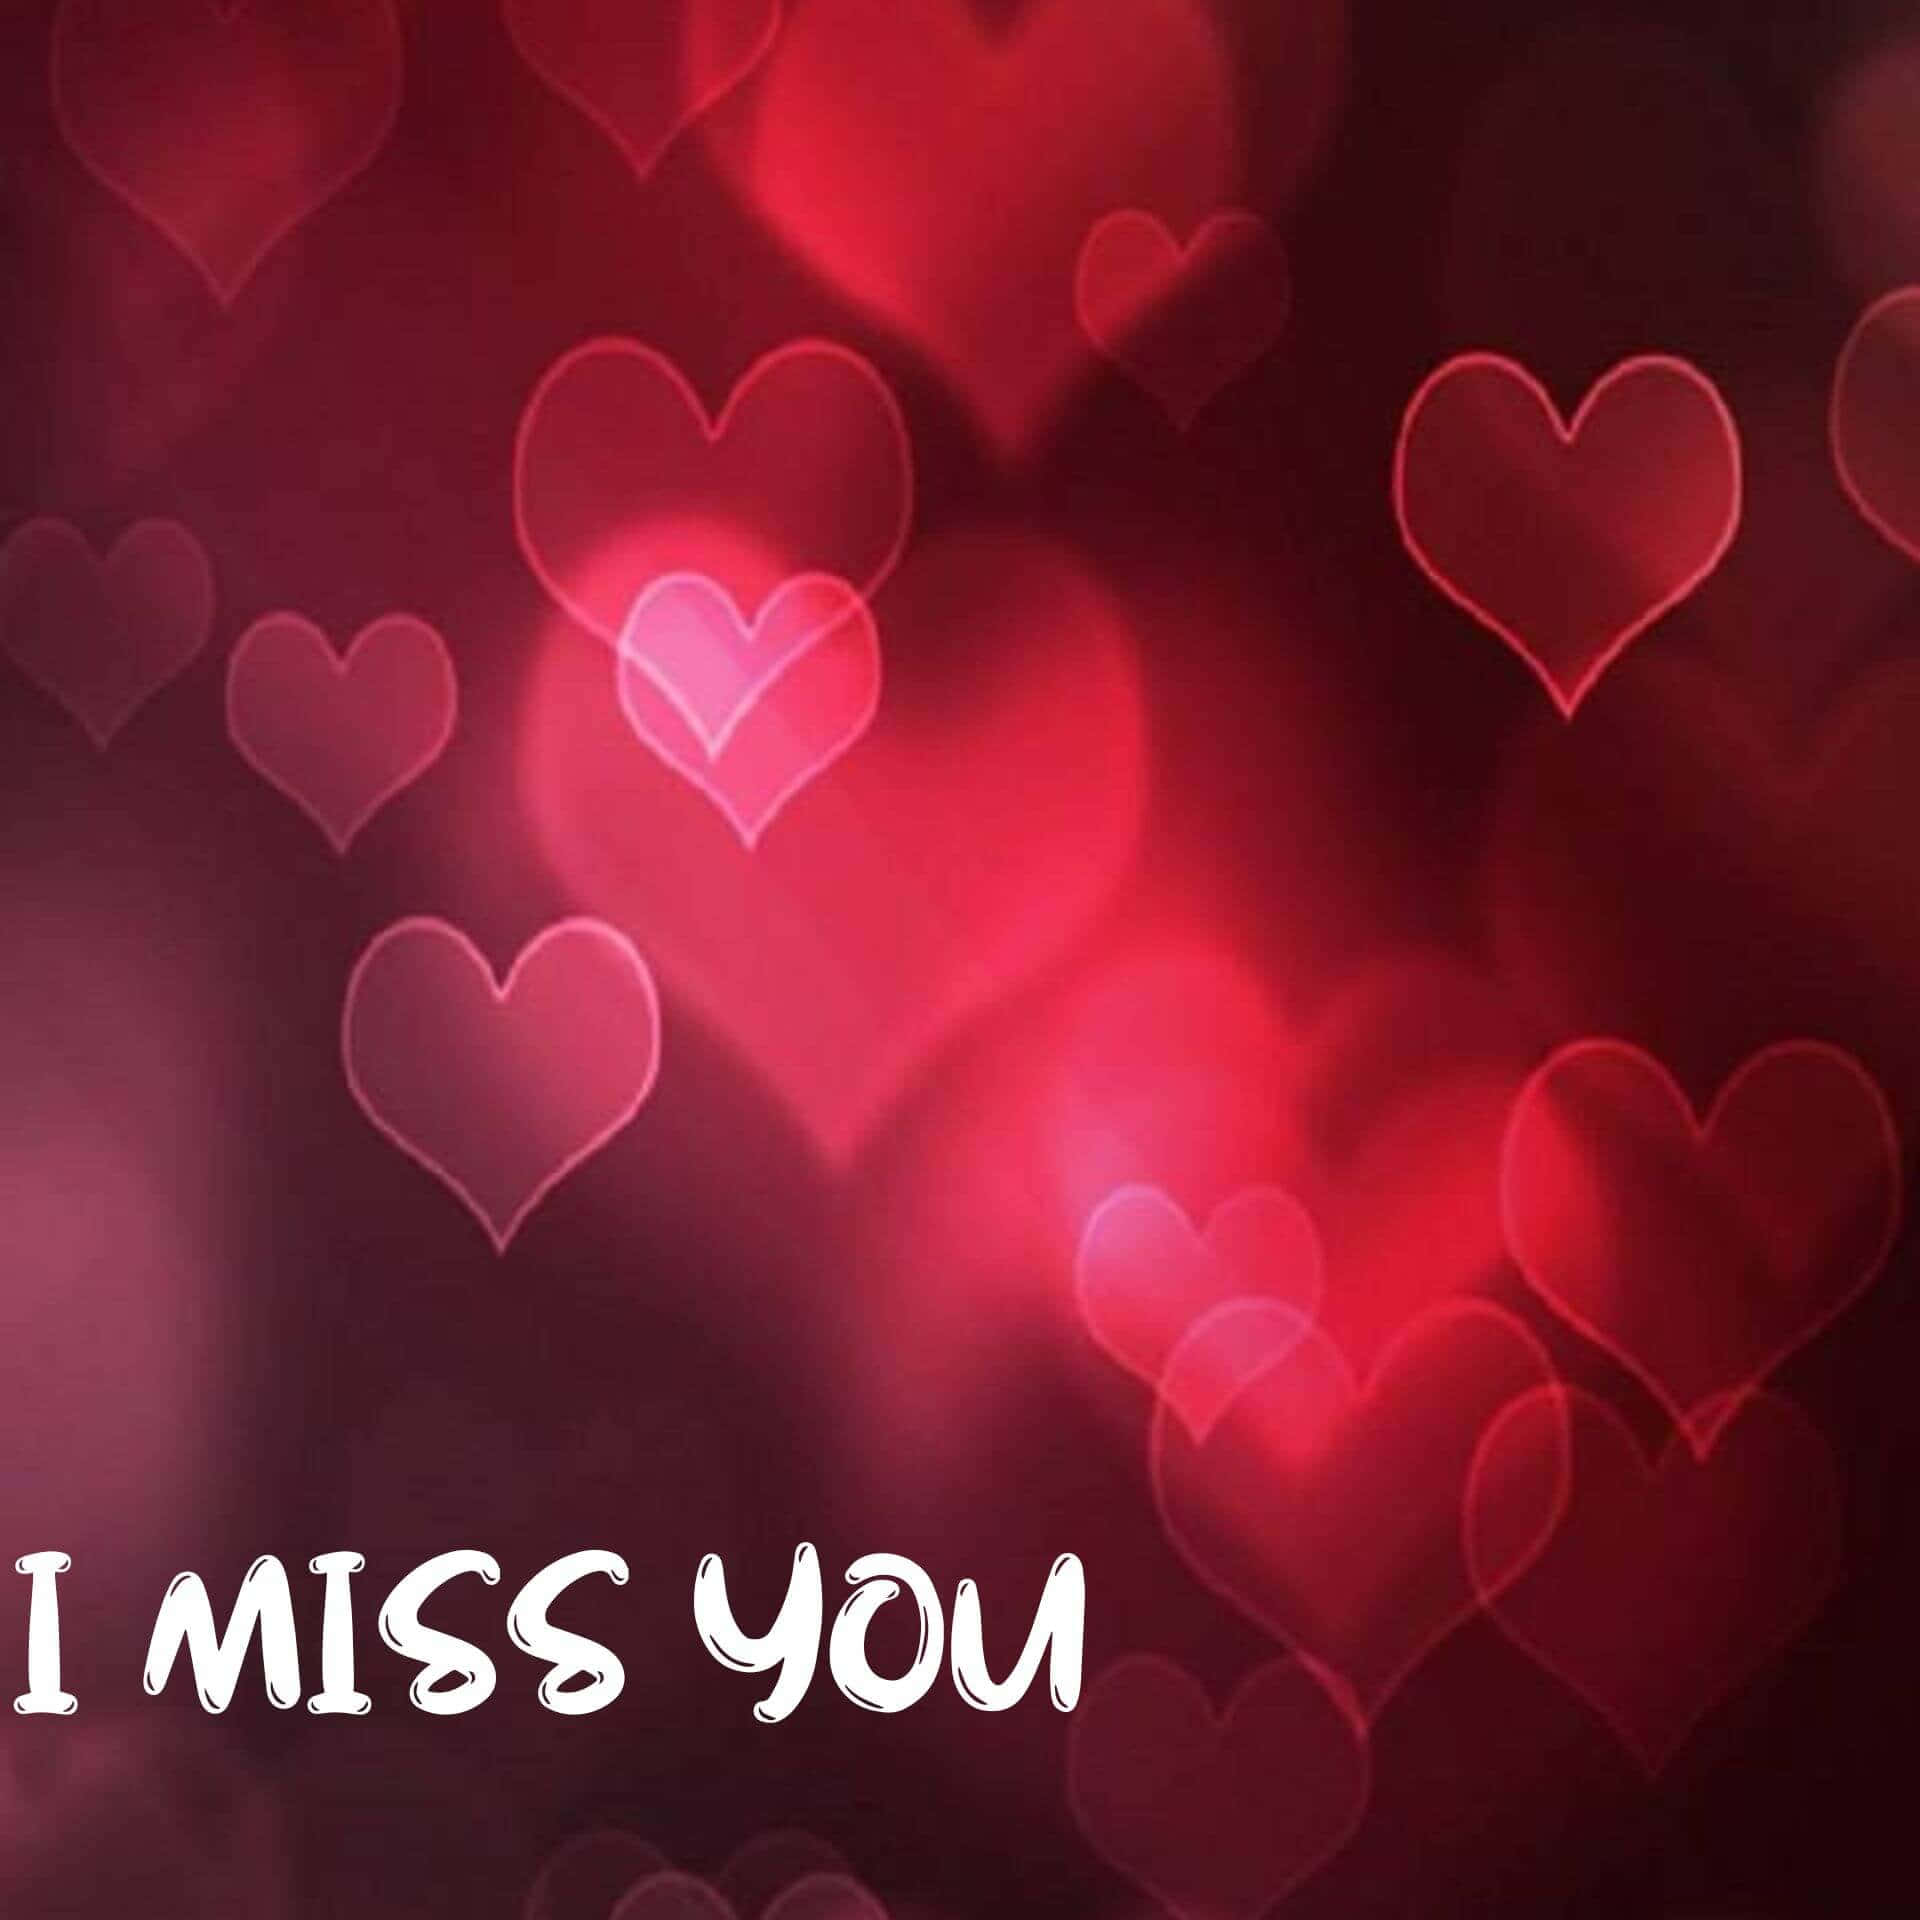 Download Loving Couple Embracing in 'I Miss You' Background ...